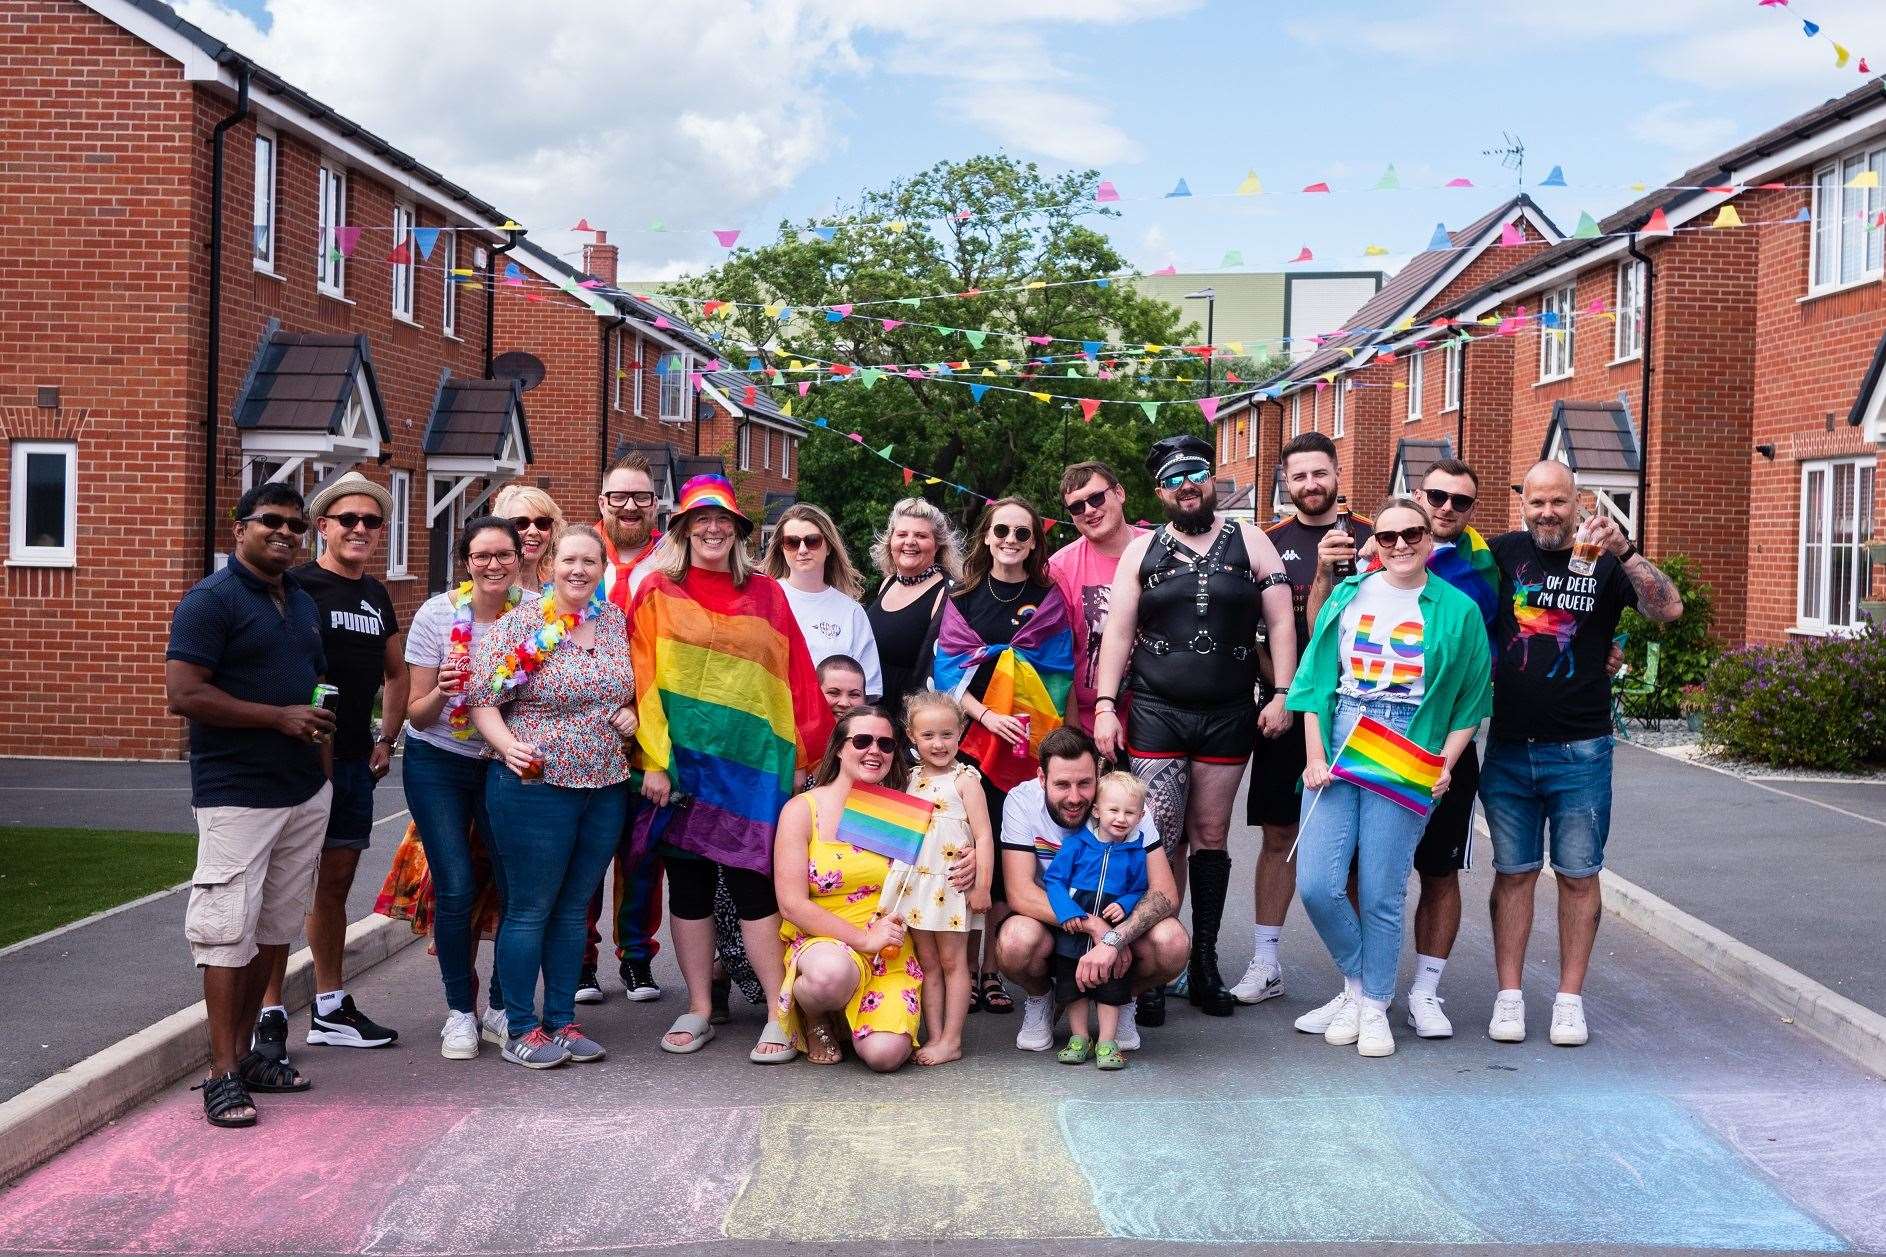 The people of Batt Close hope to continue hosting their Pride parade annually (RB Films)